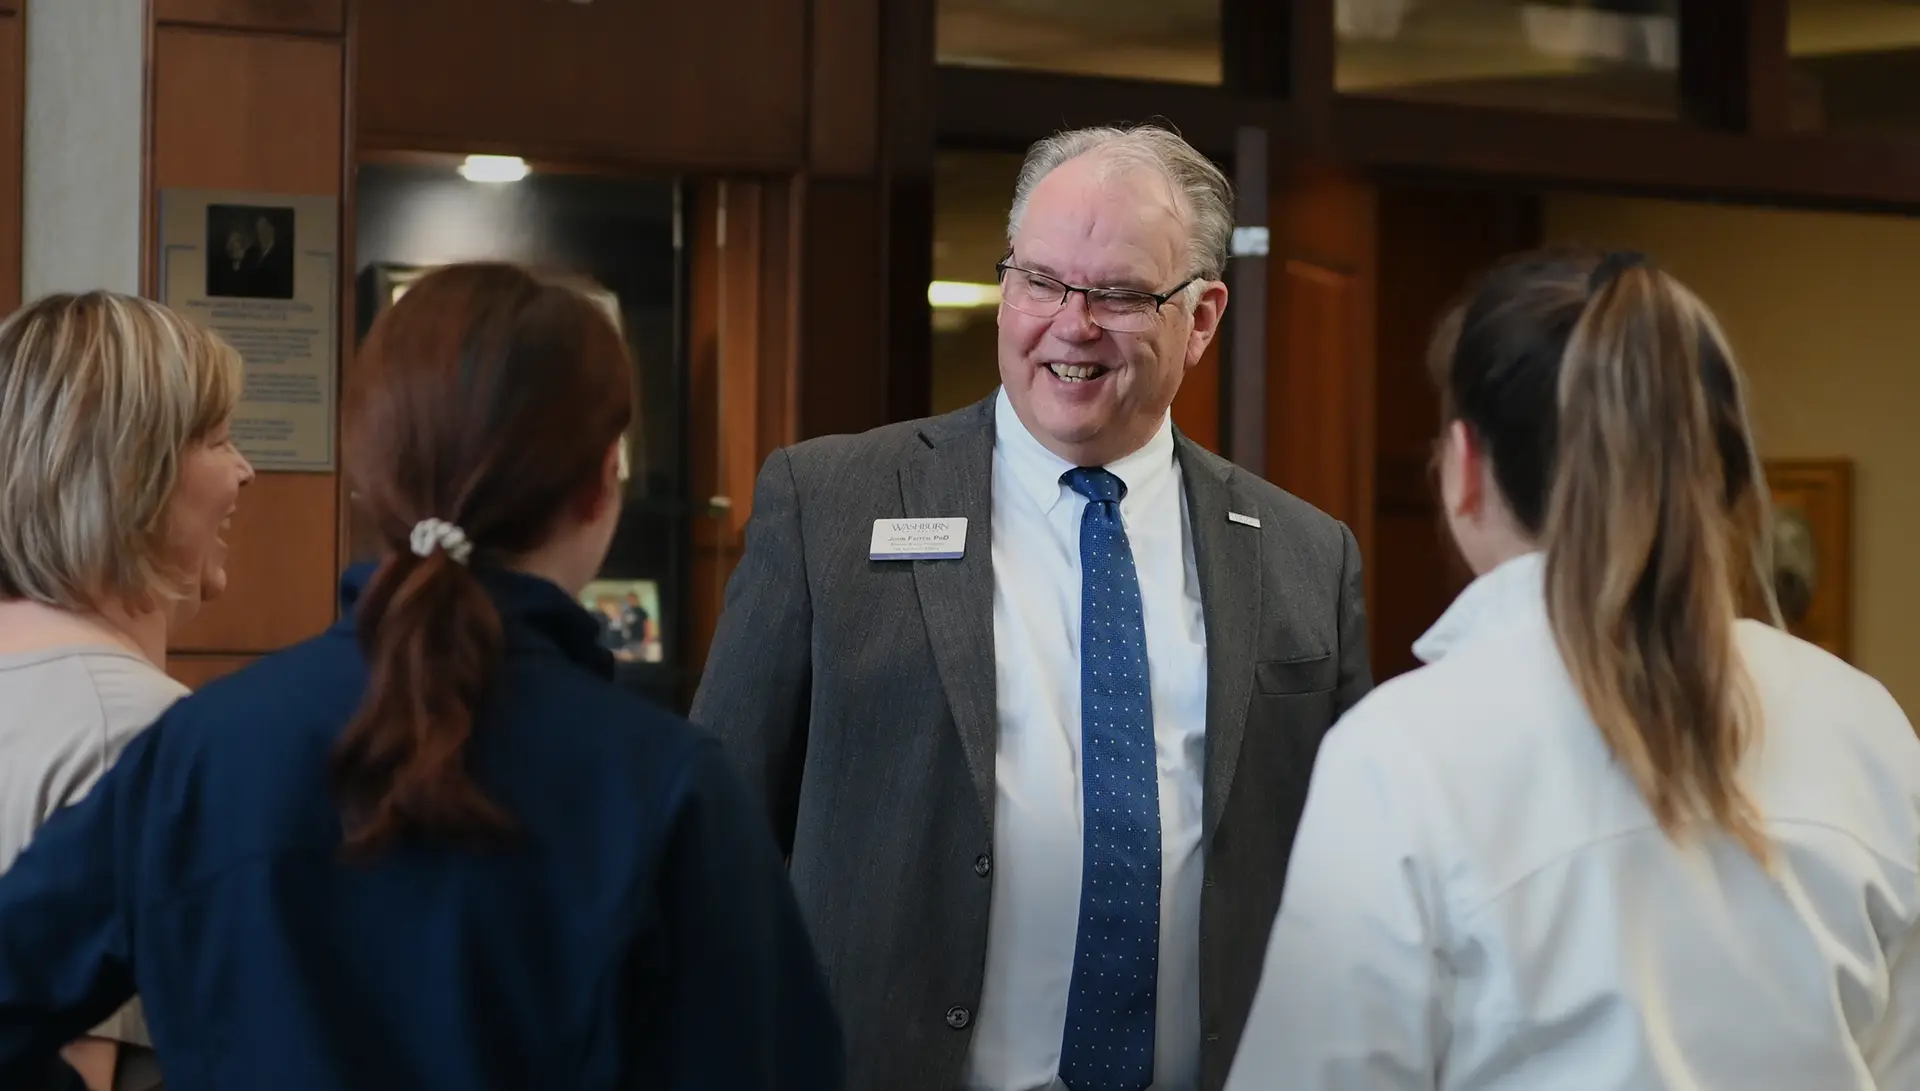 Provost John Fritch talking with employees during a meet and greet.